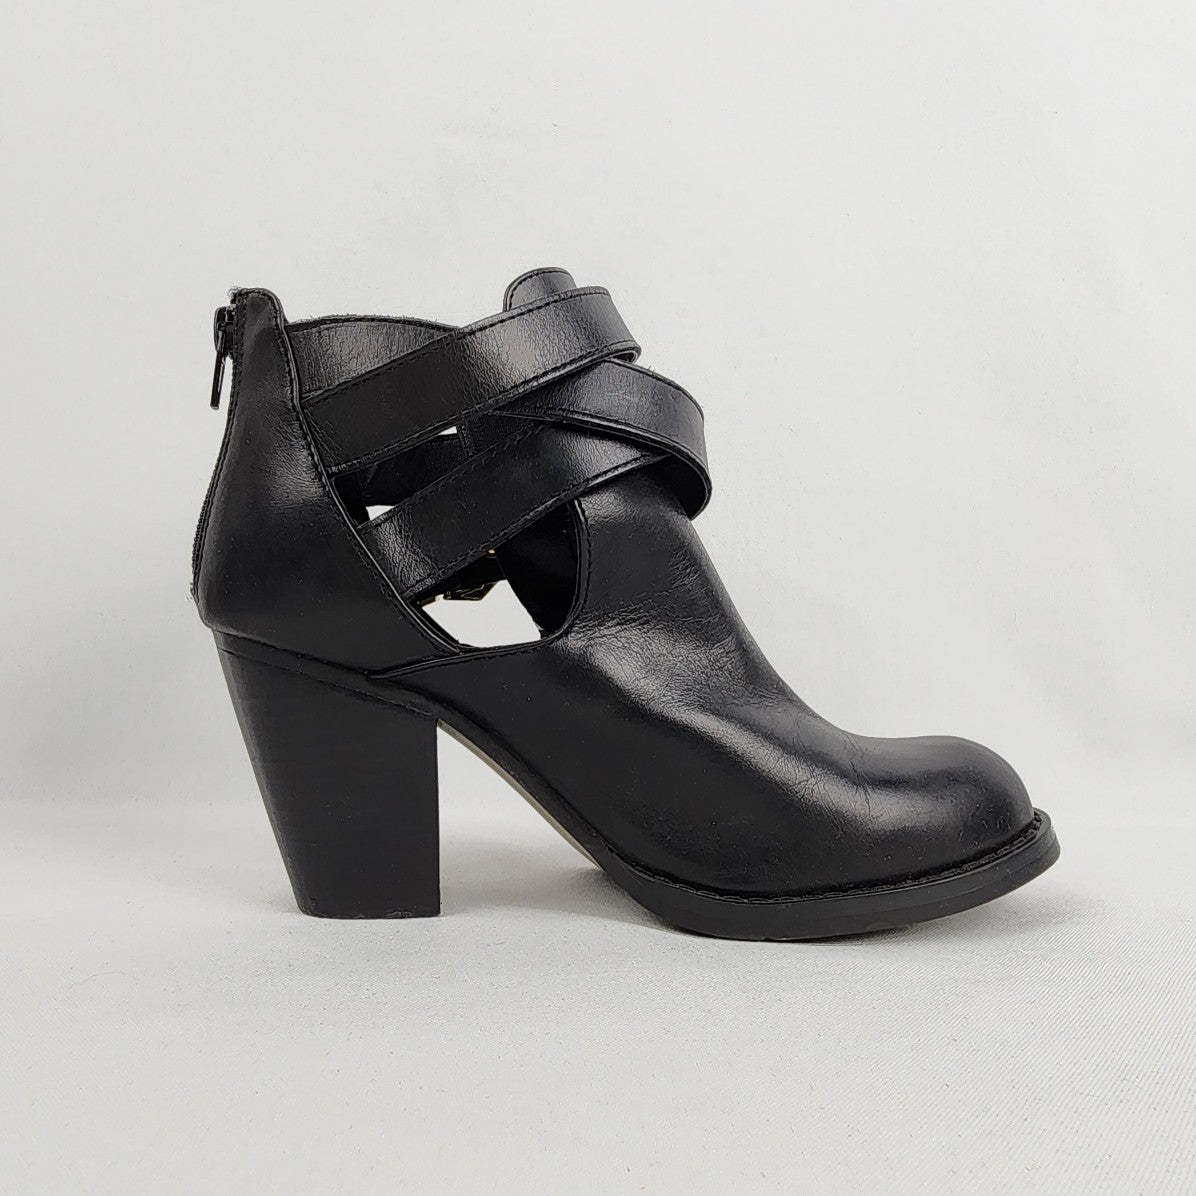 Kate & Mel Black Leather Belted Wrap Heeled Booties Size 6